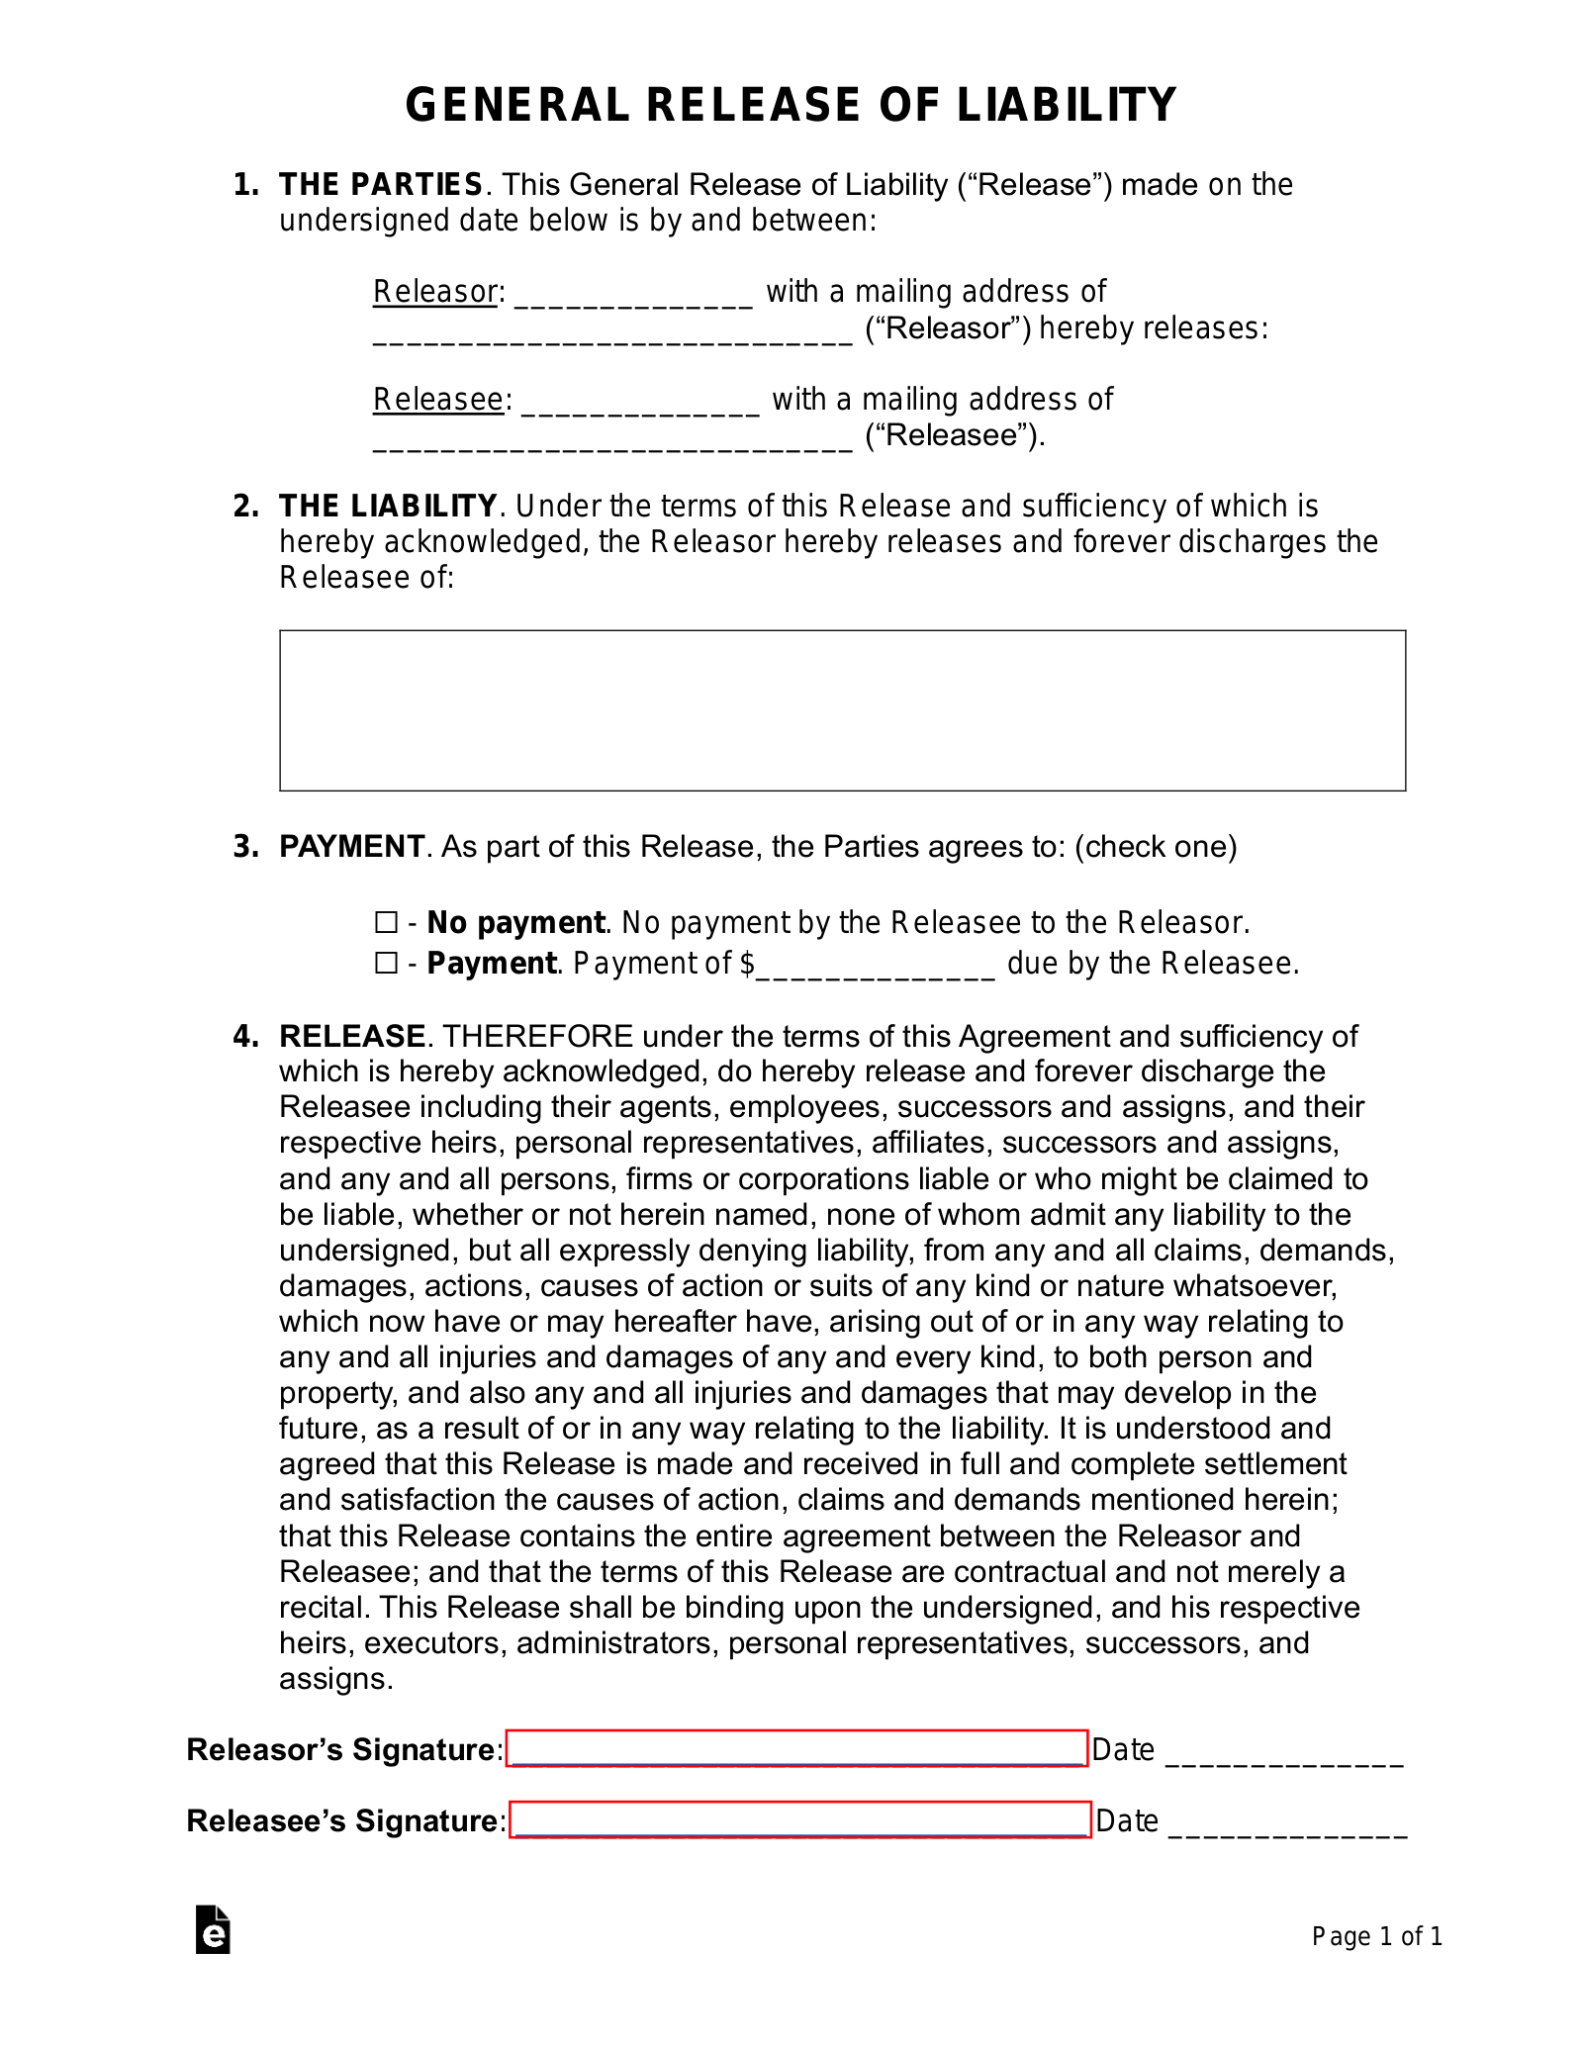 free-printable-general-release-form-printable-forms-free-online